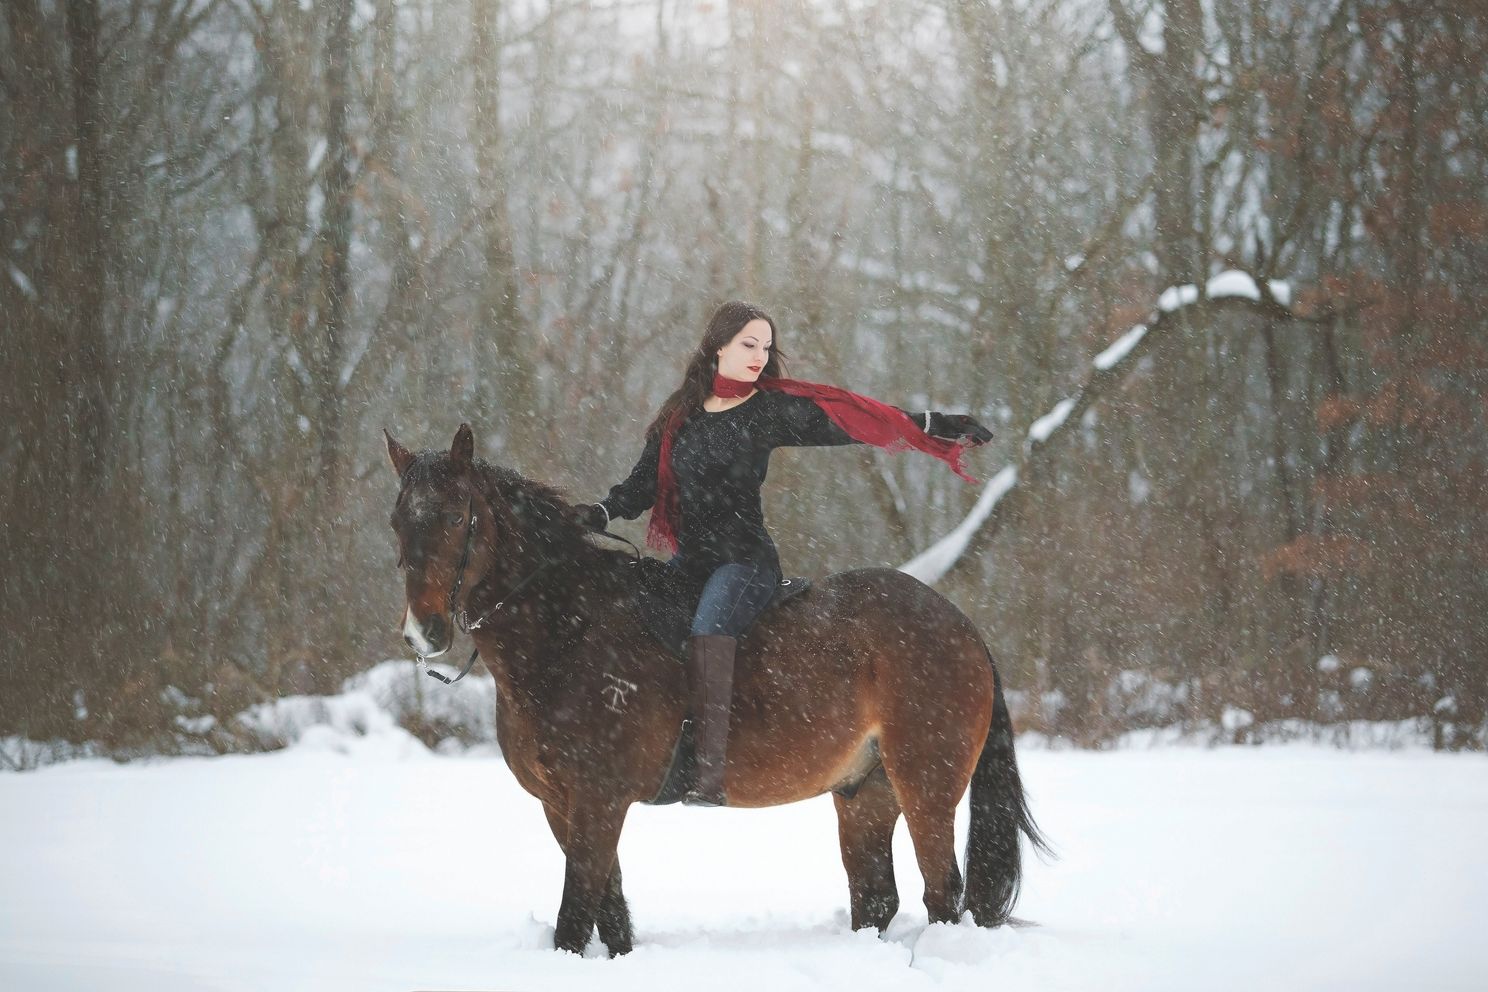 horse-and-woman-in-snow.jpg 1